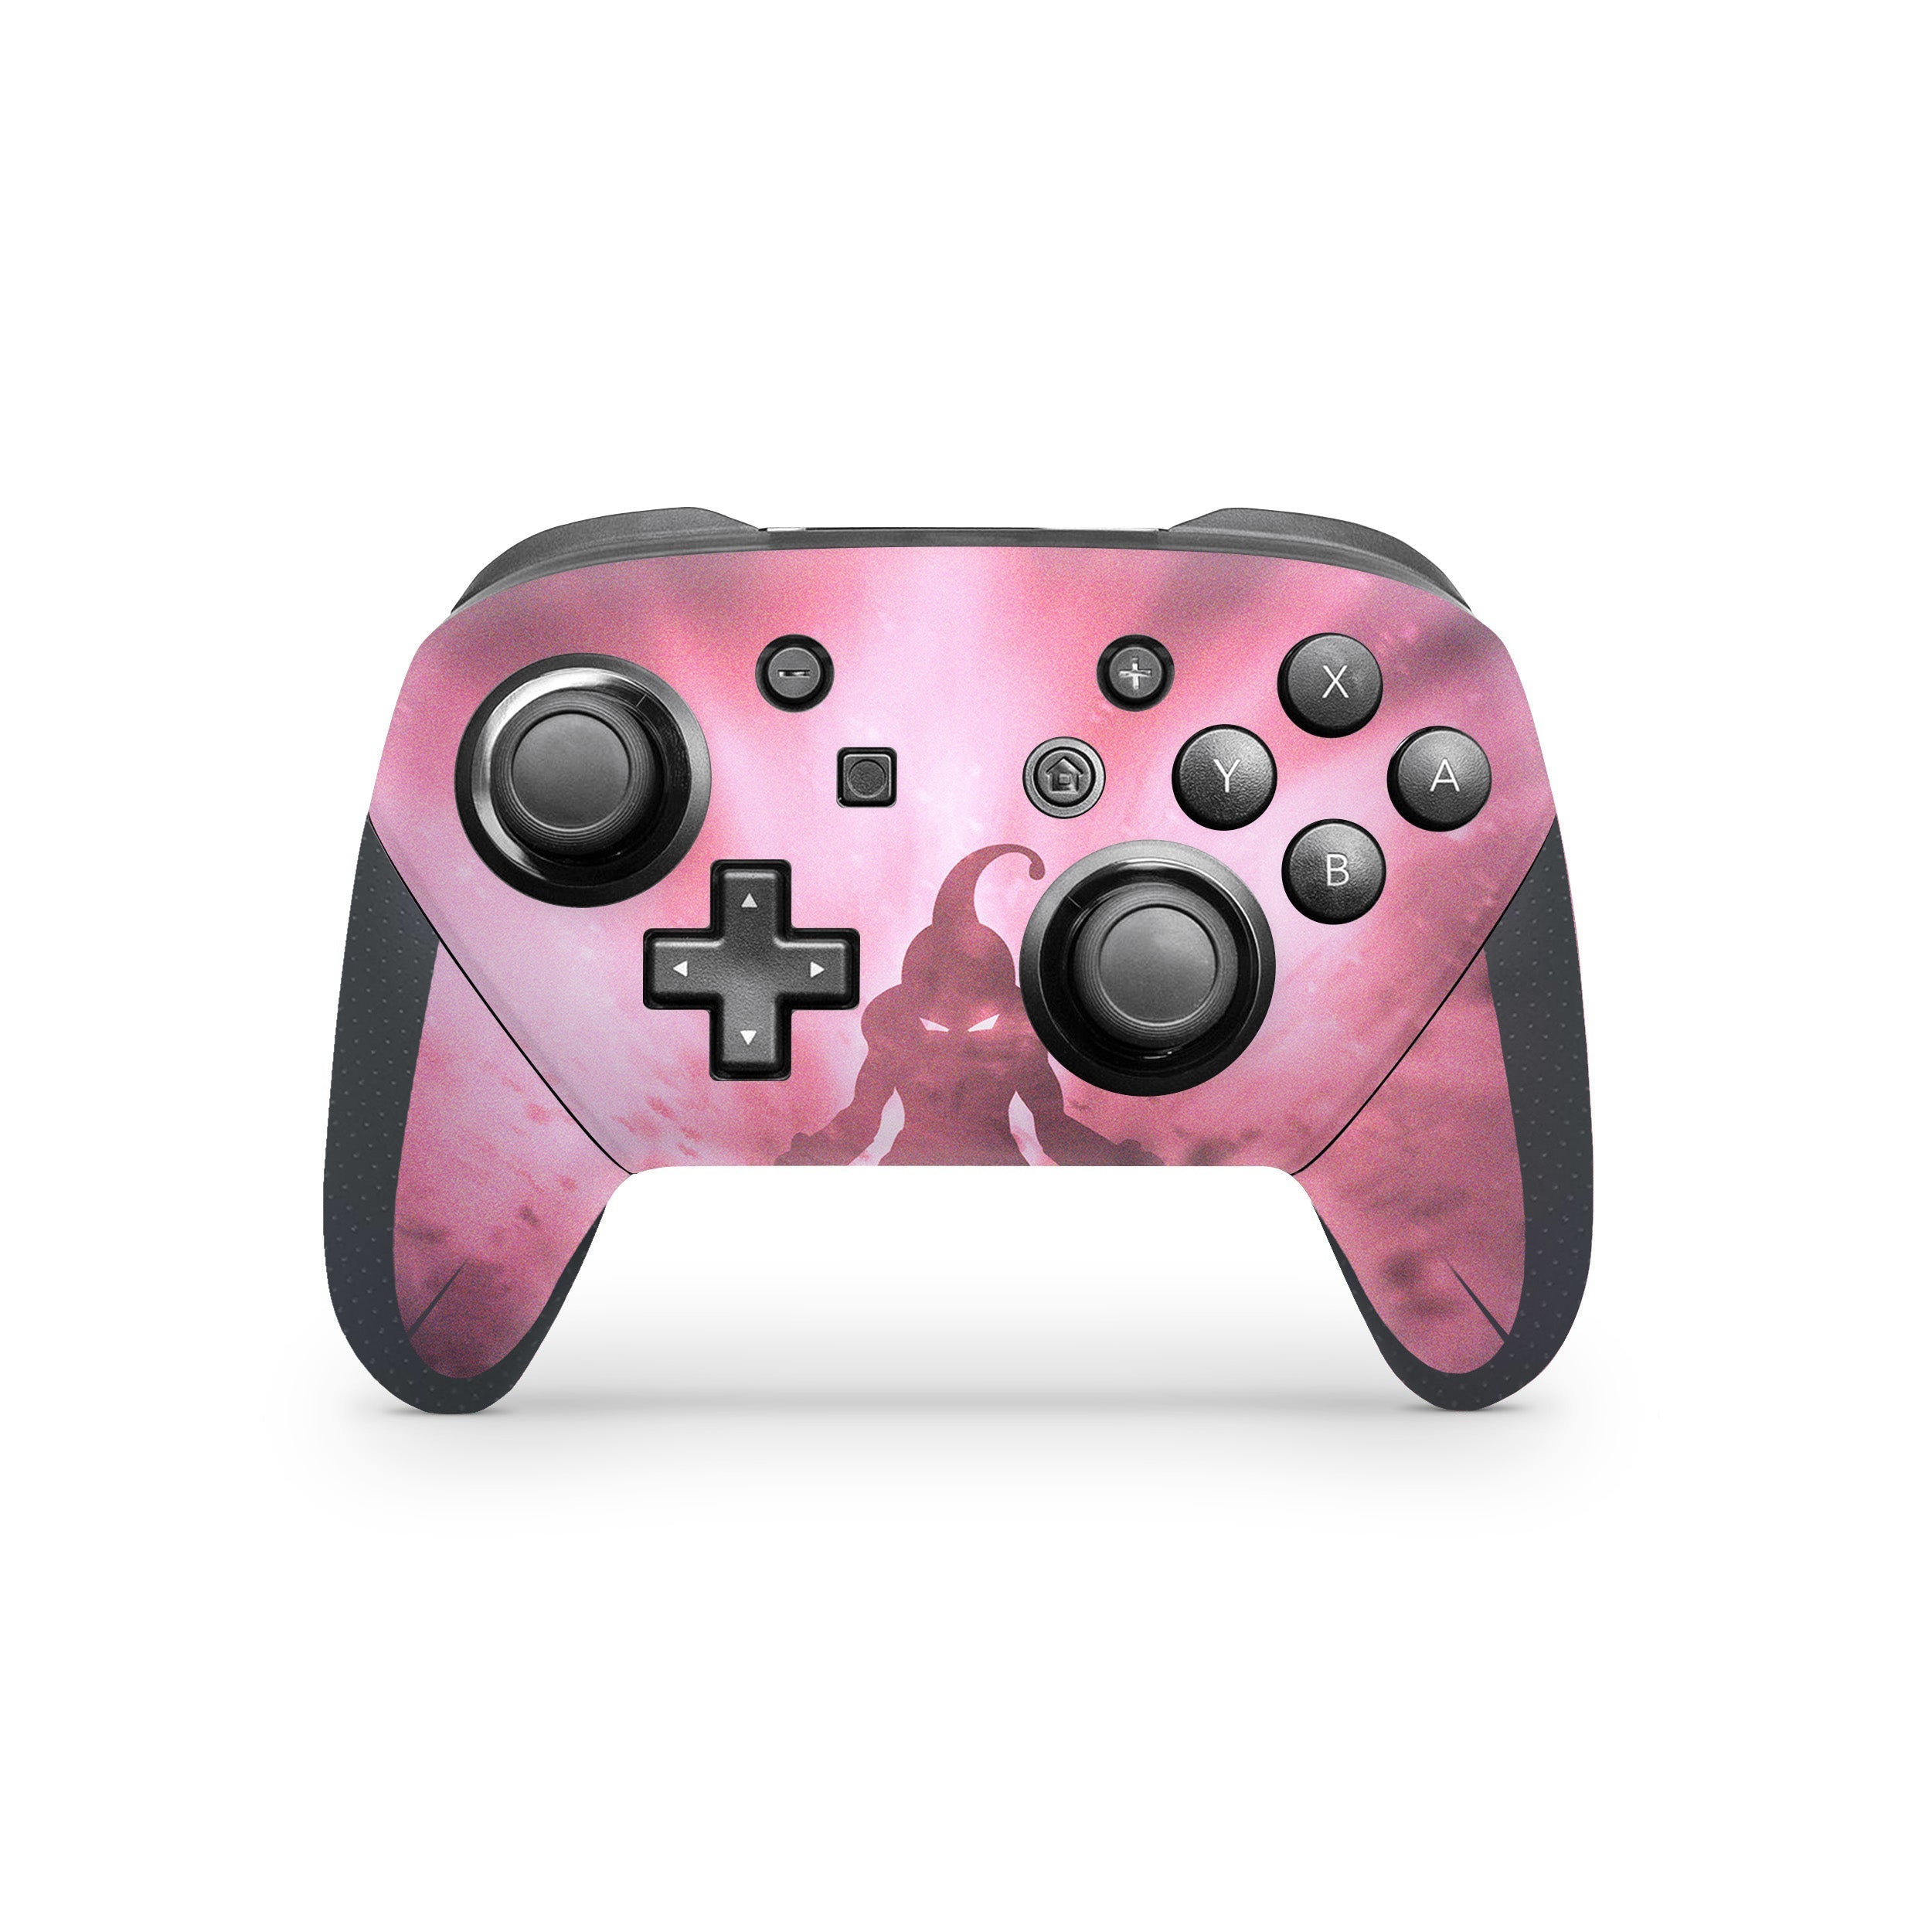 A video game skin featuring a Dragon Ball Z Majin Buu design for the Switch Pro Controller.